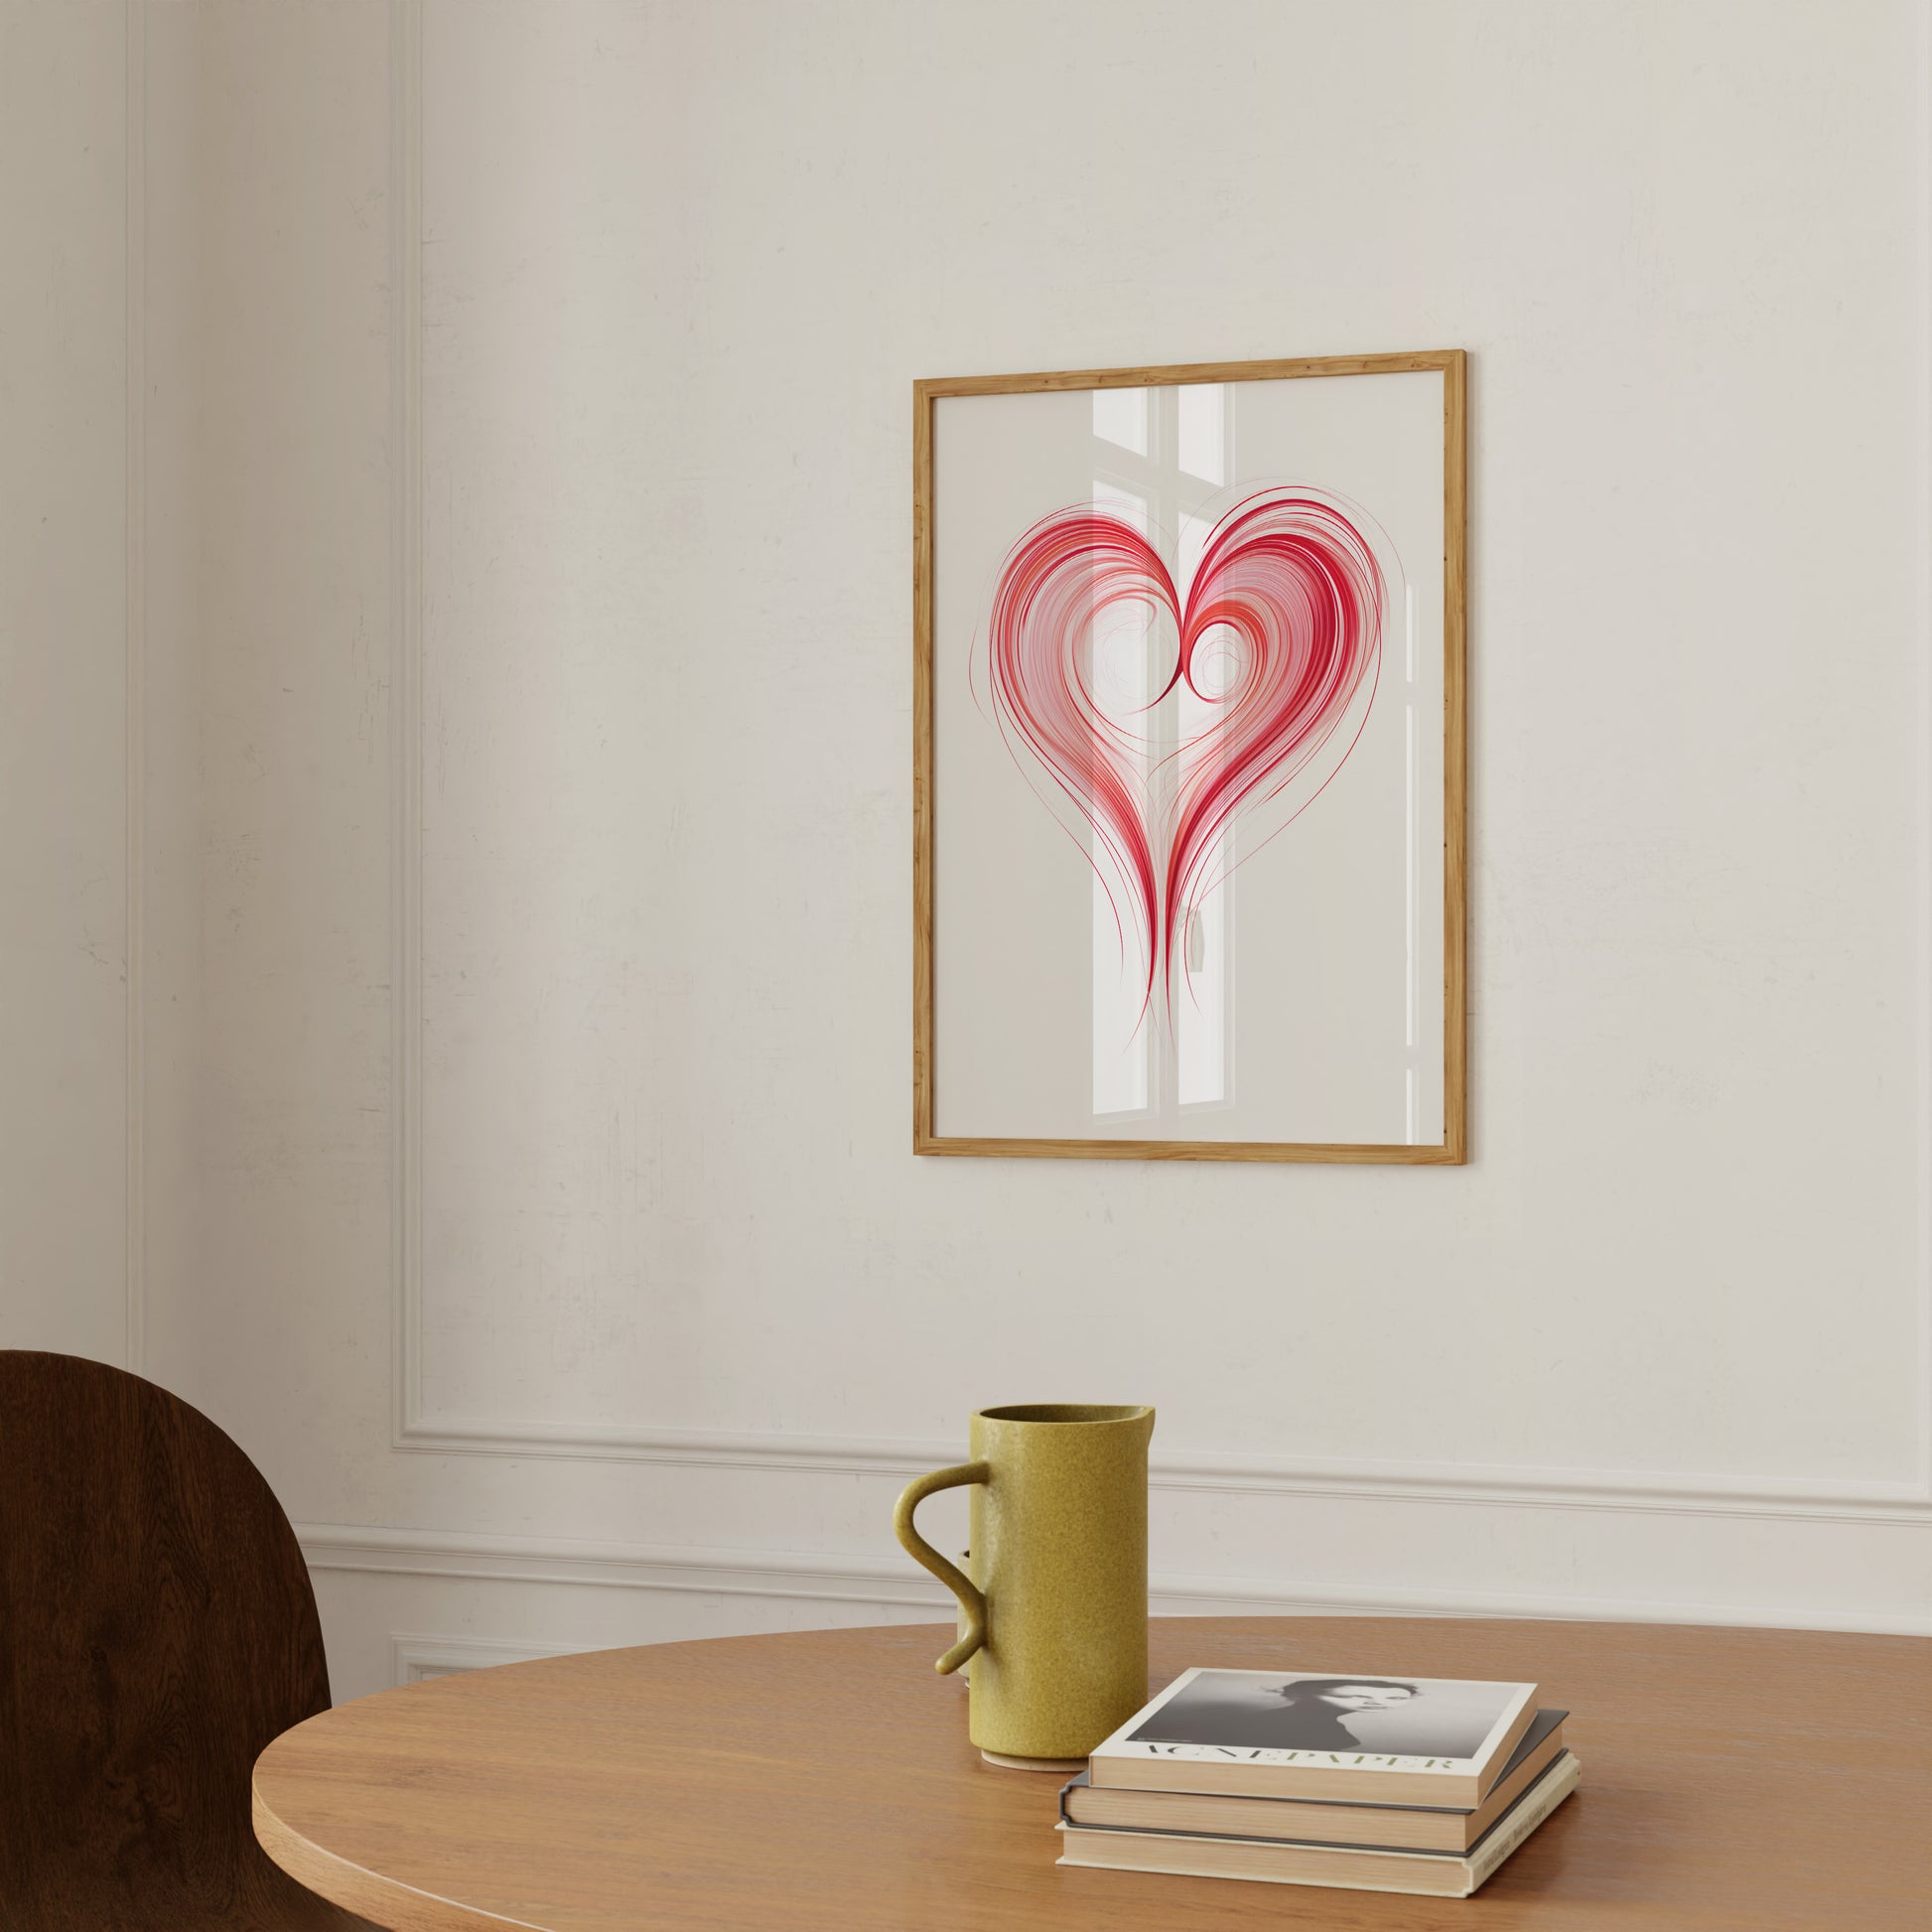 A framed heart-shaped artwork on a wall above a table with a mug and books.